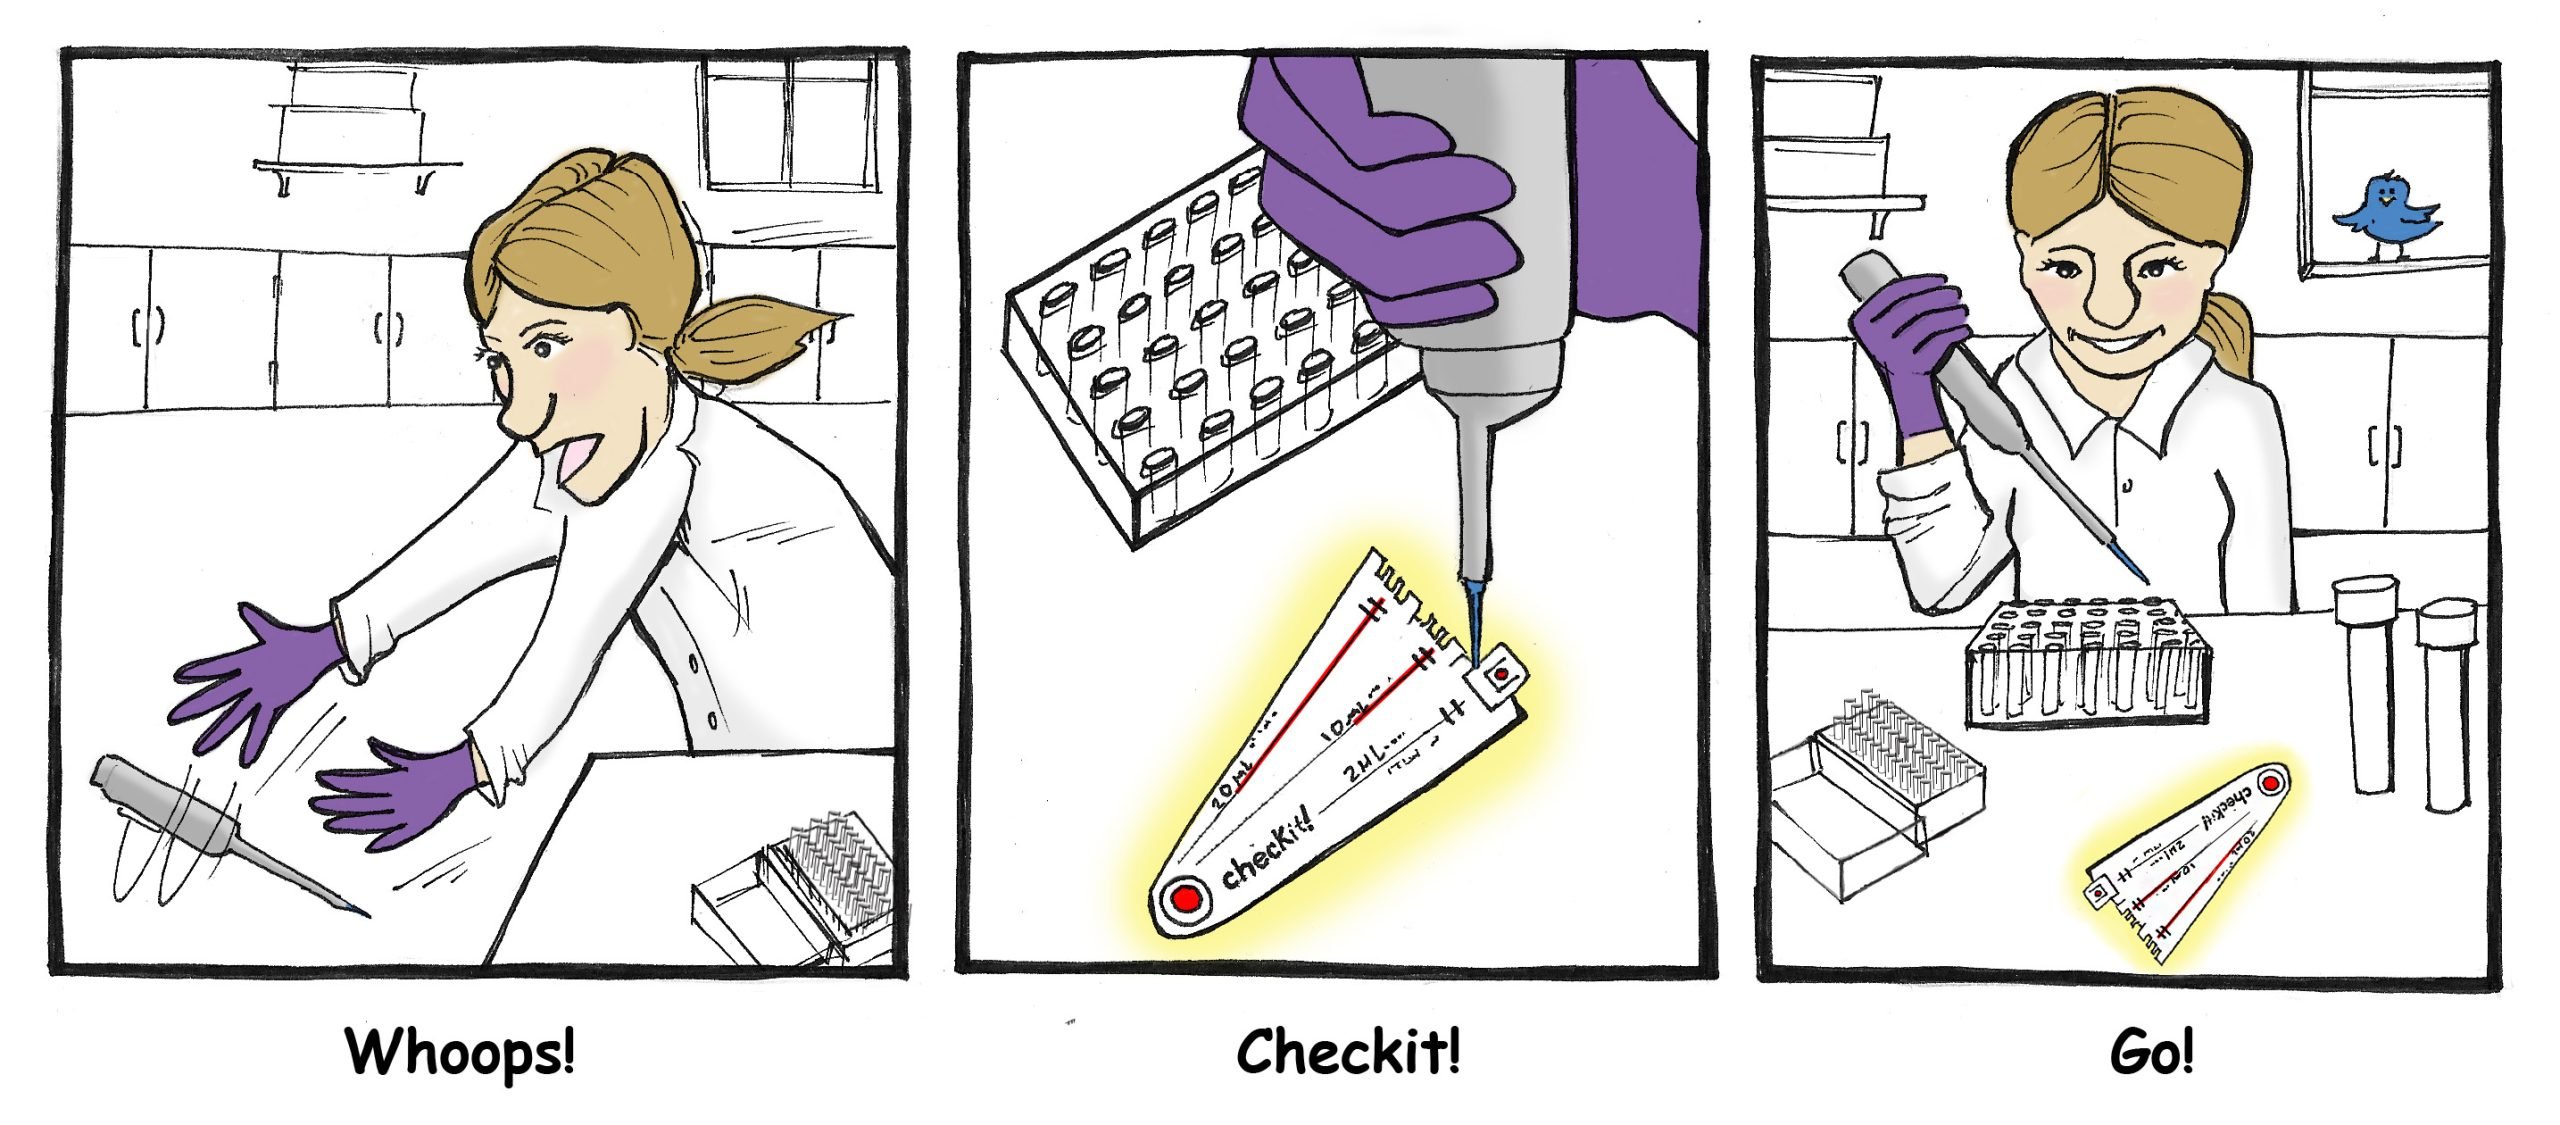 A comic of a woman dropping her pipette in the first panel and the same woman, using the Checkit in the second panel, and pipetting happily in the last panel